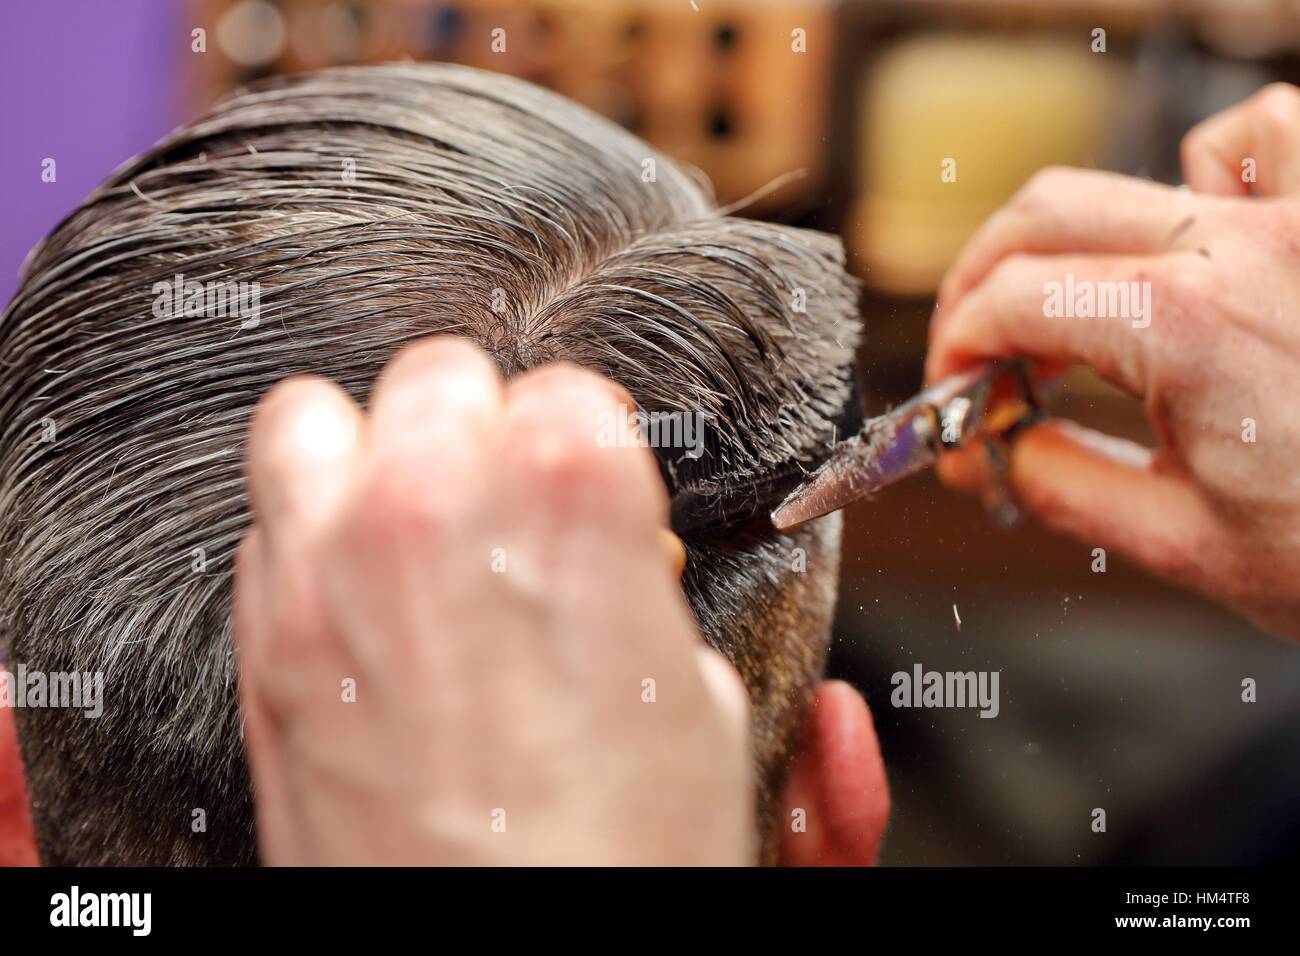 Hairdresser trimming hair with scissors Stock Photo